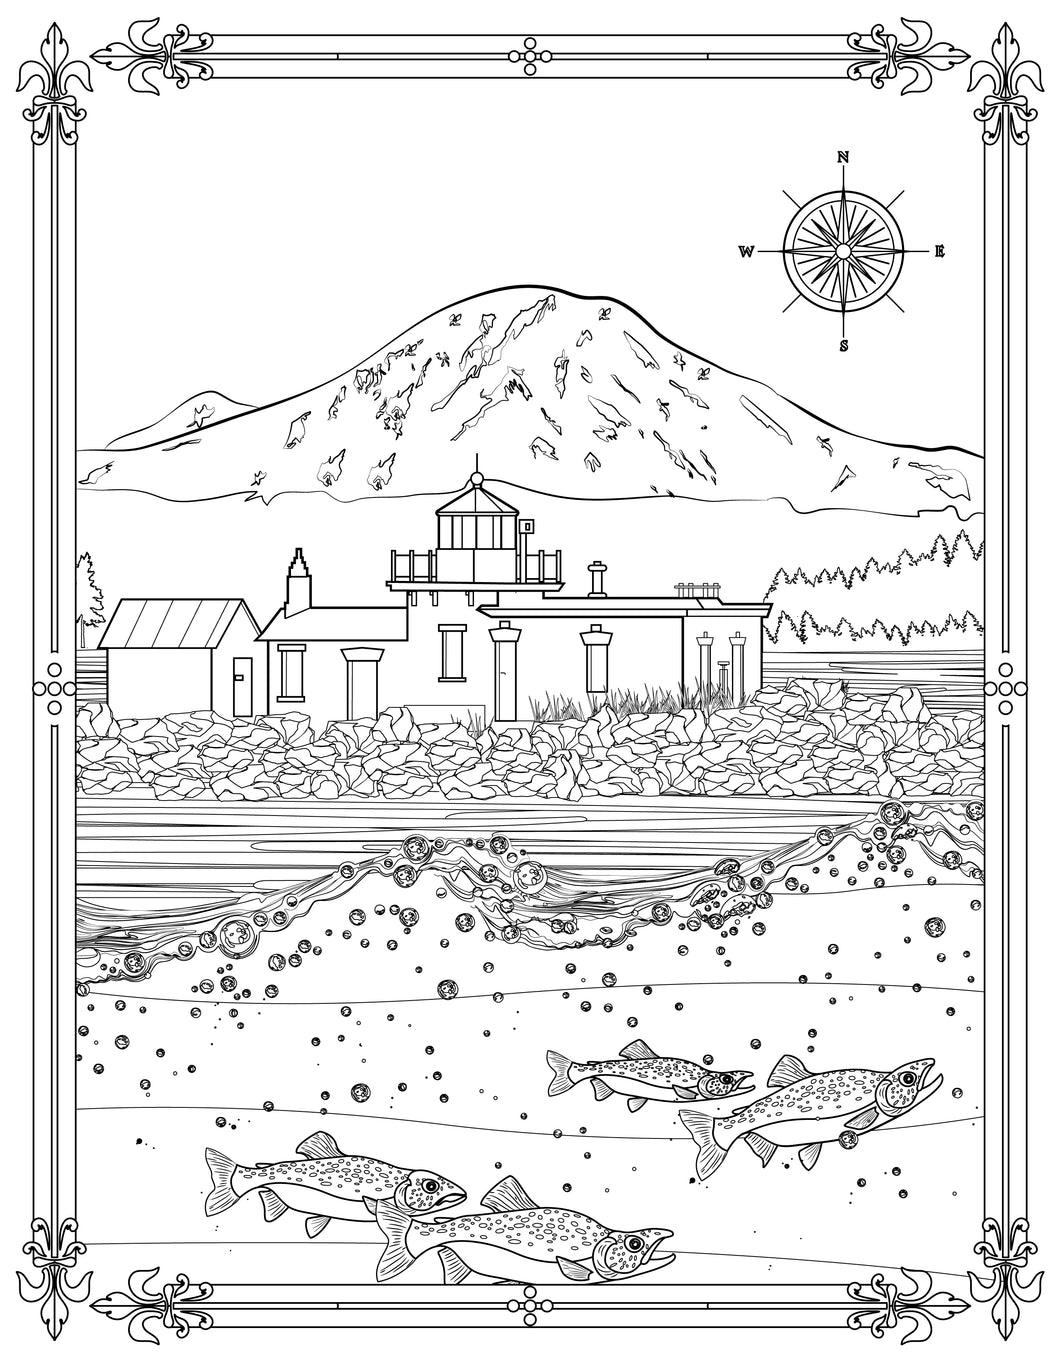 Single Coloring Book Page - West Point Lighthouse, Washington - Digital Print-from-Home